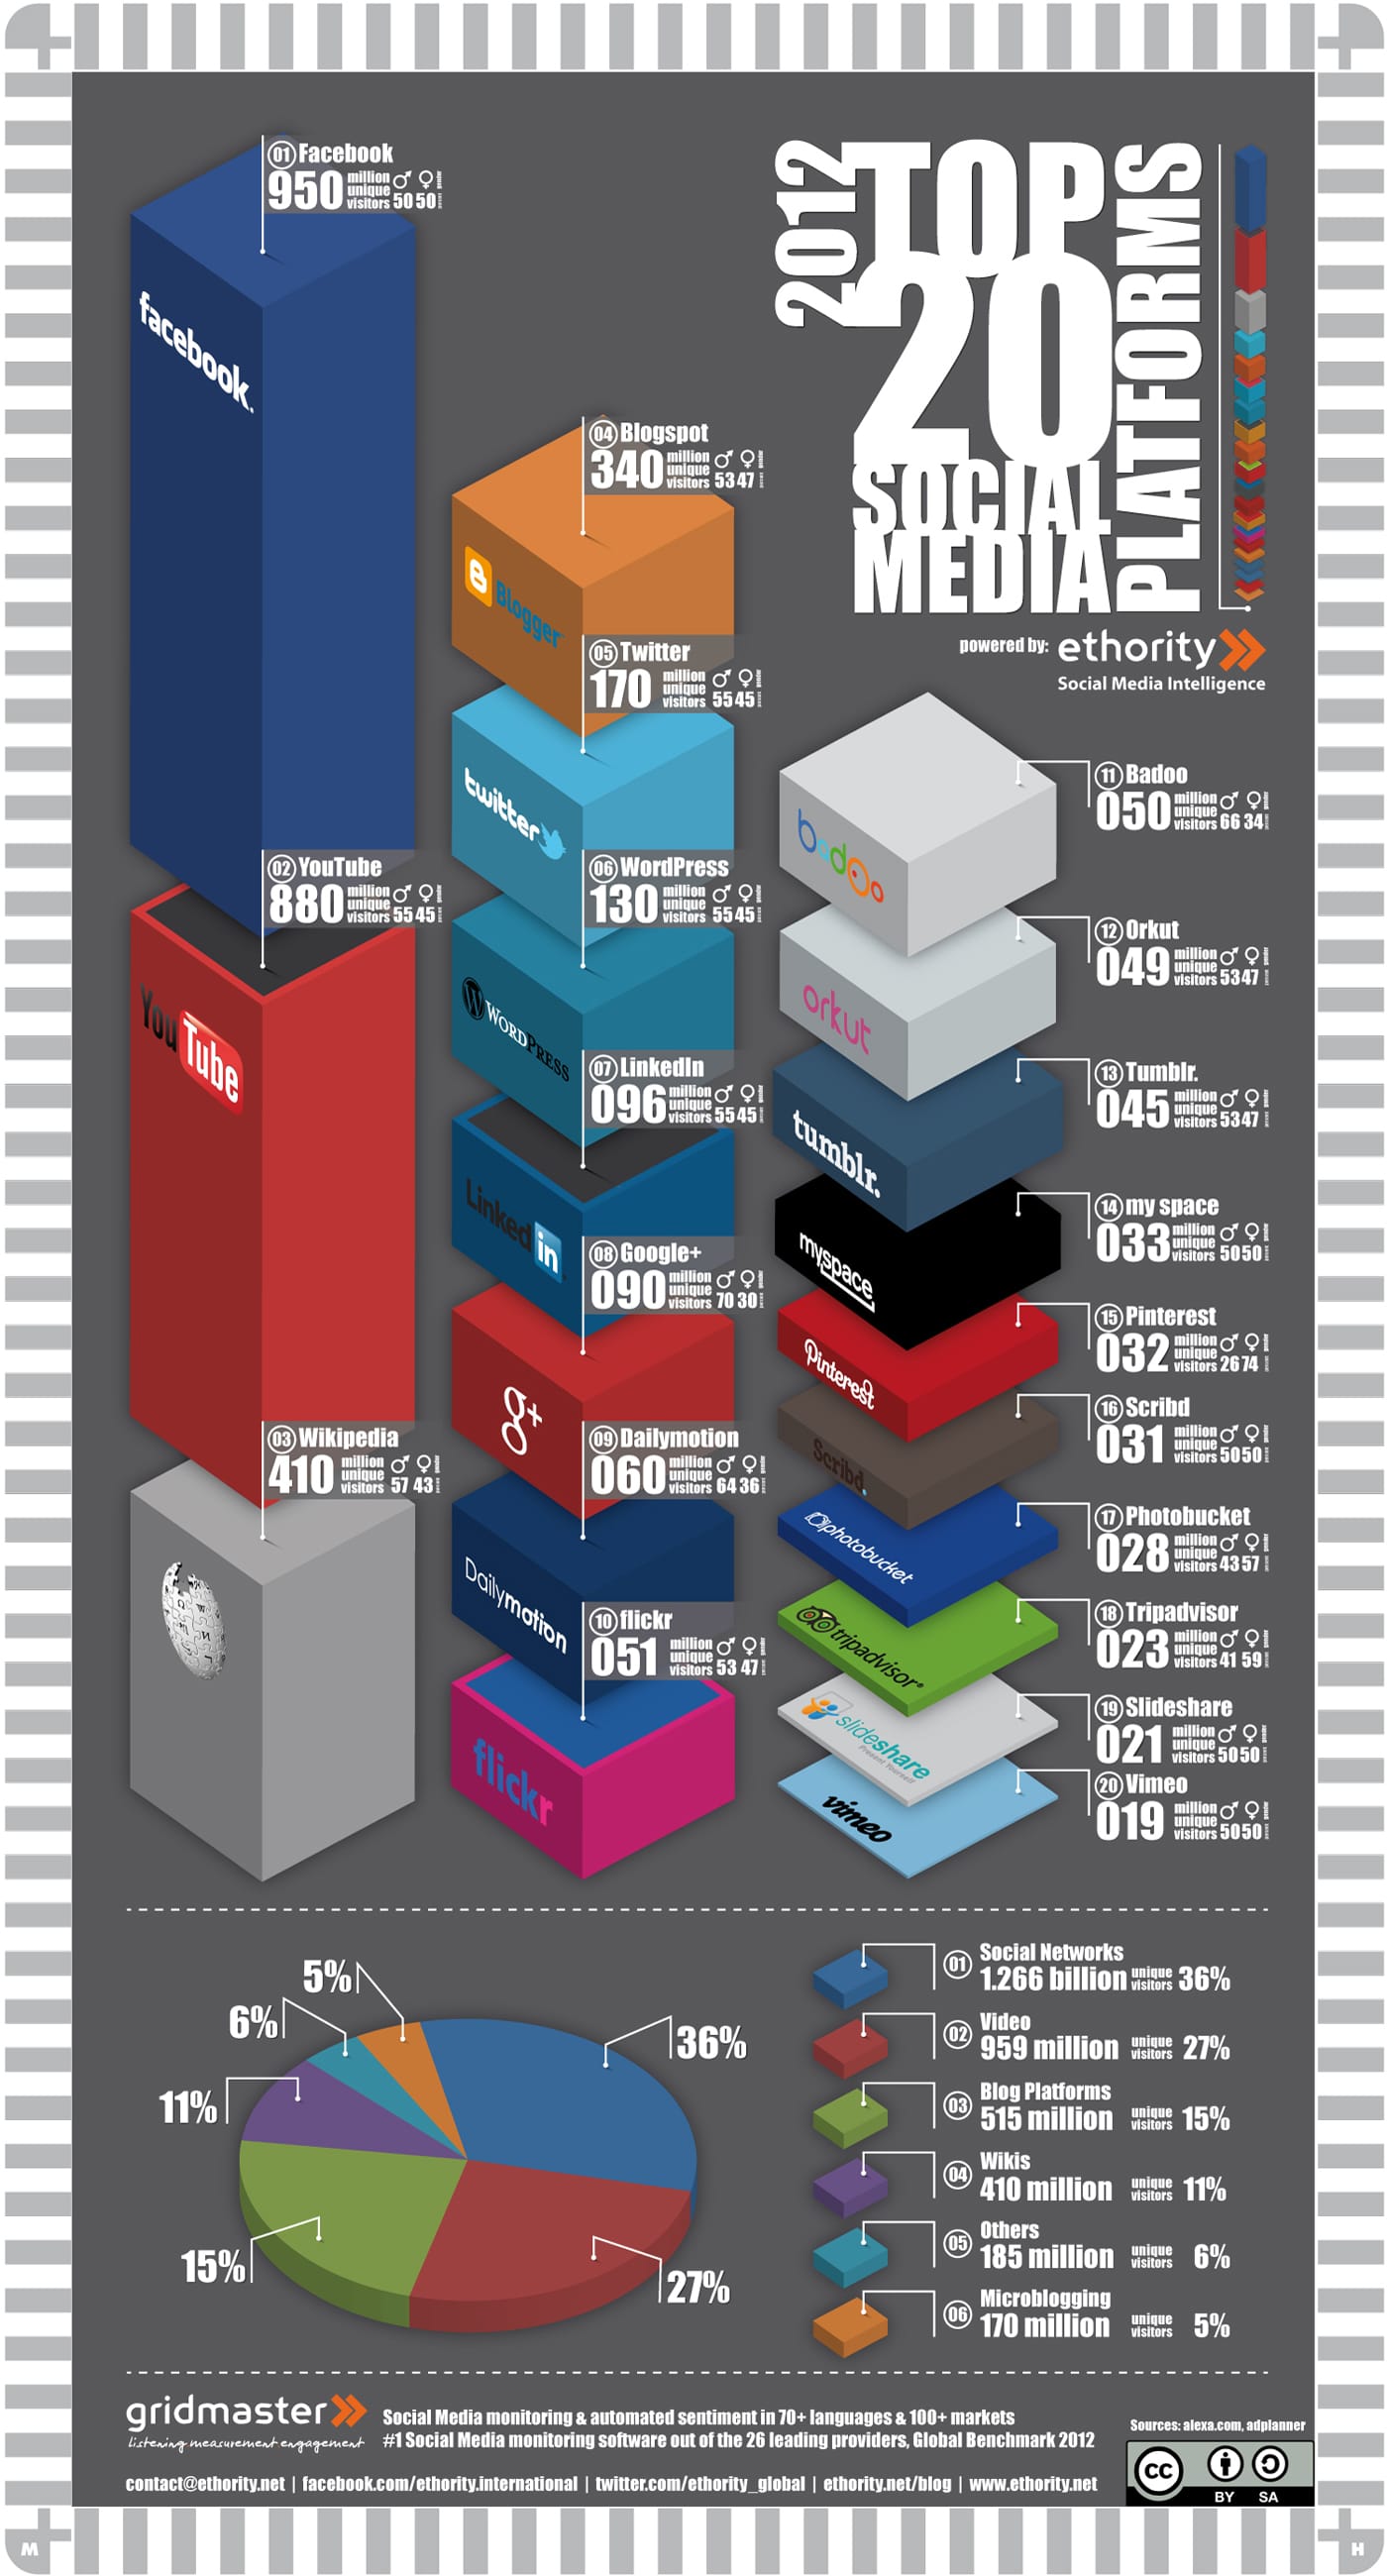 2012 Top 20 Social Platforms By Unique Monthly Visitors [Infographic]